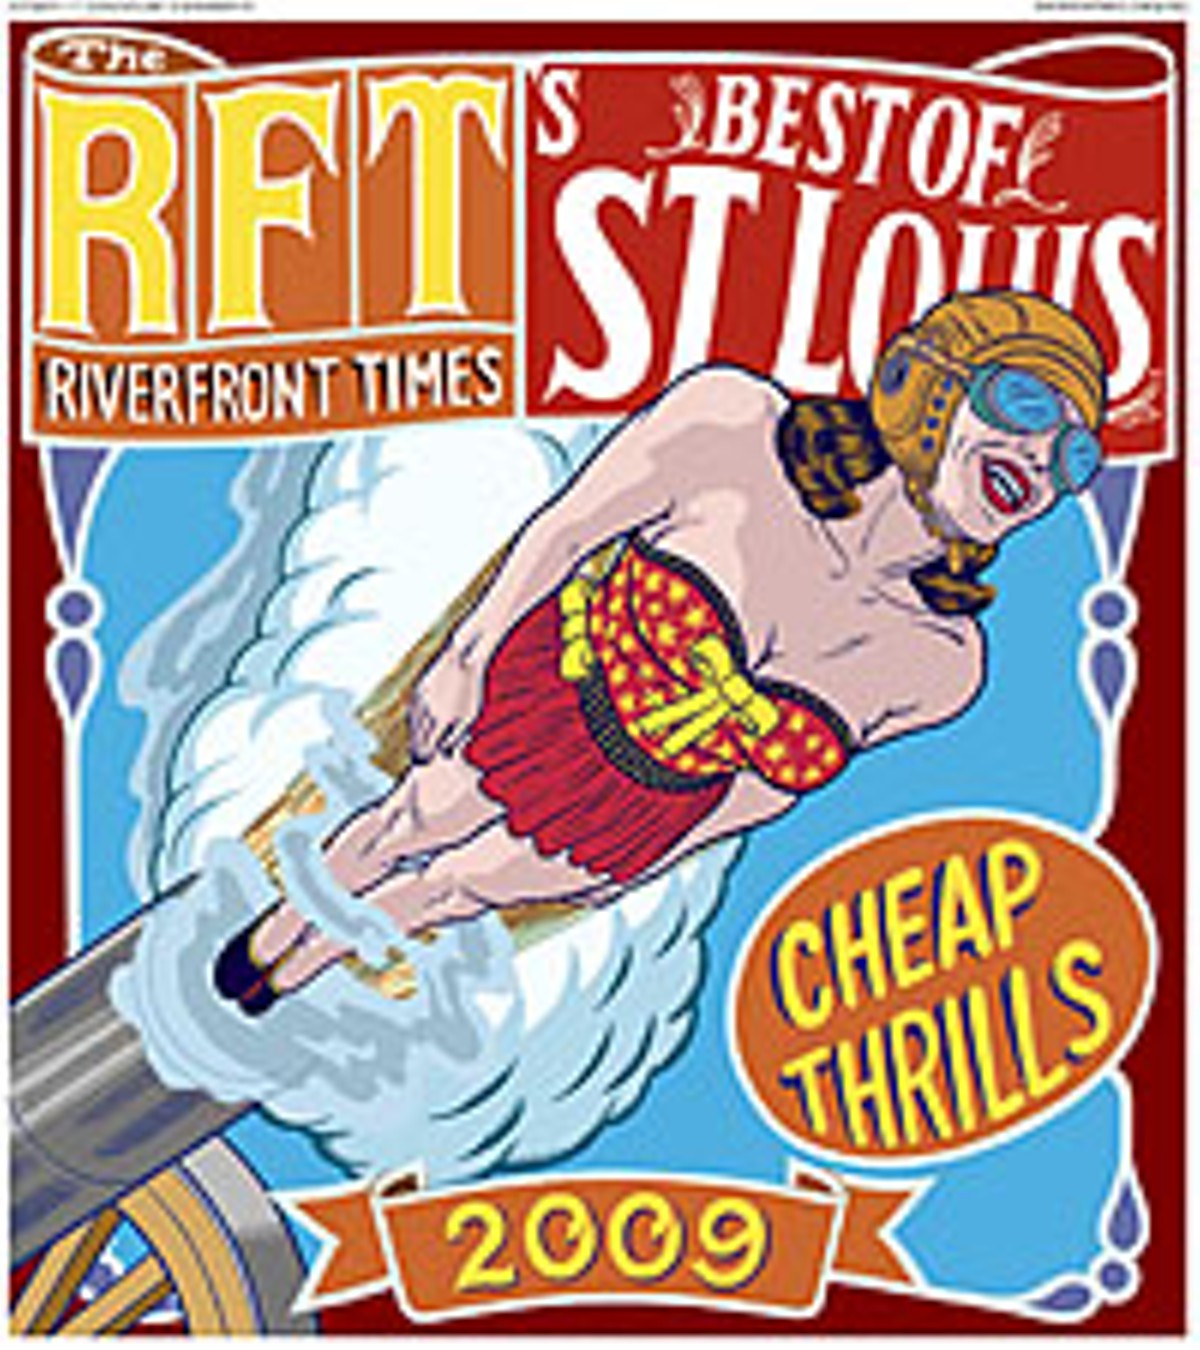 Best of St. Louis 2009 Issue Cover